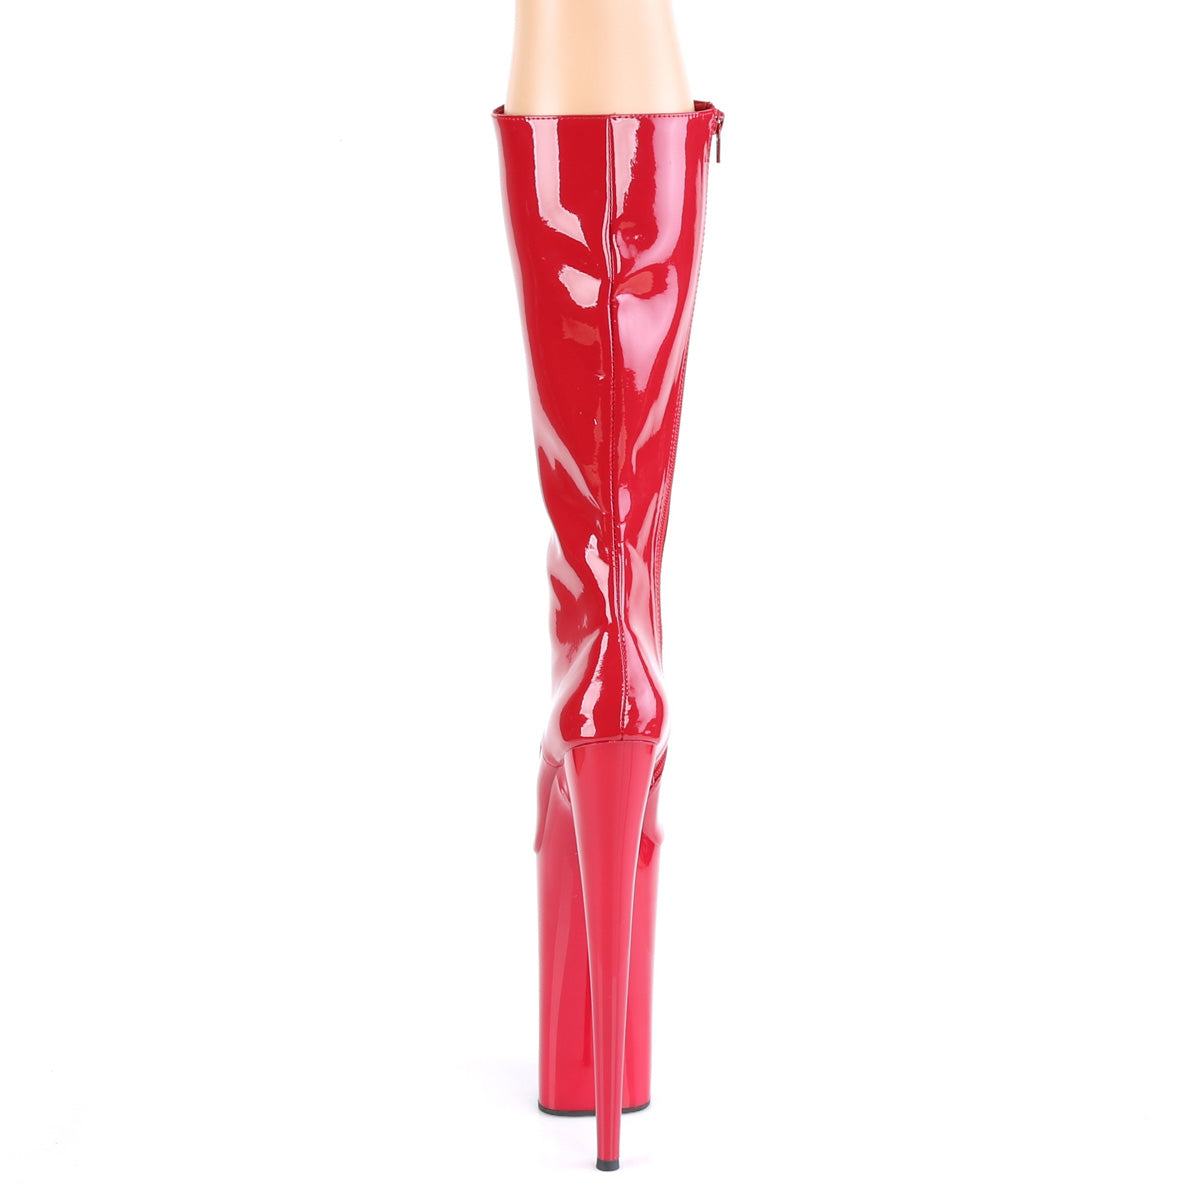 PLEASER BEYOND-2020 RED 10 INCH HIGH HEEL KNEE HIGH BOOTS SIZE 8 USA SALE